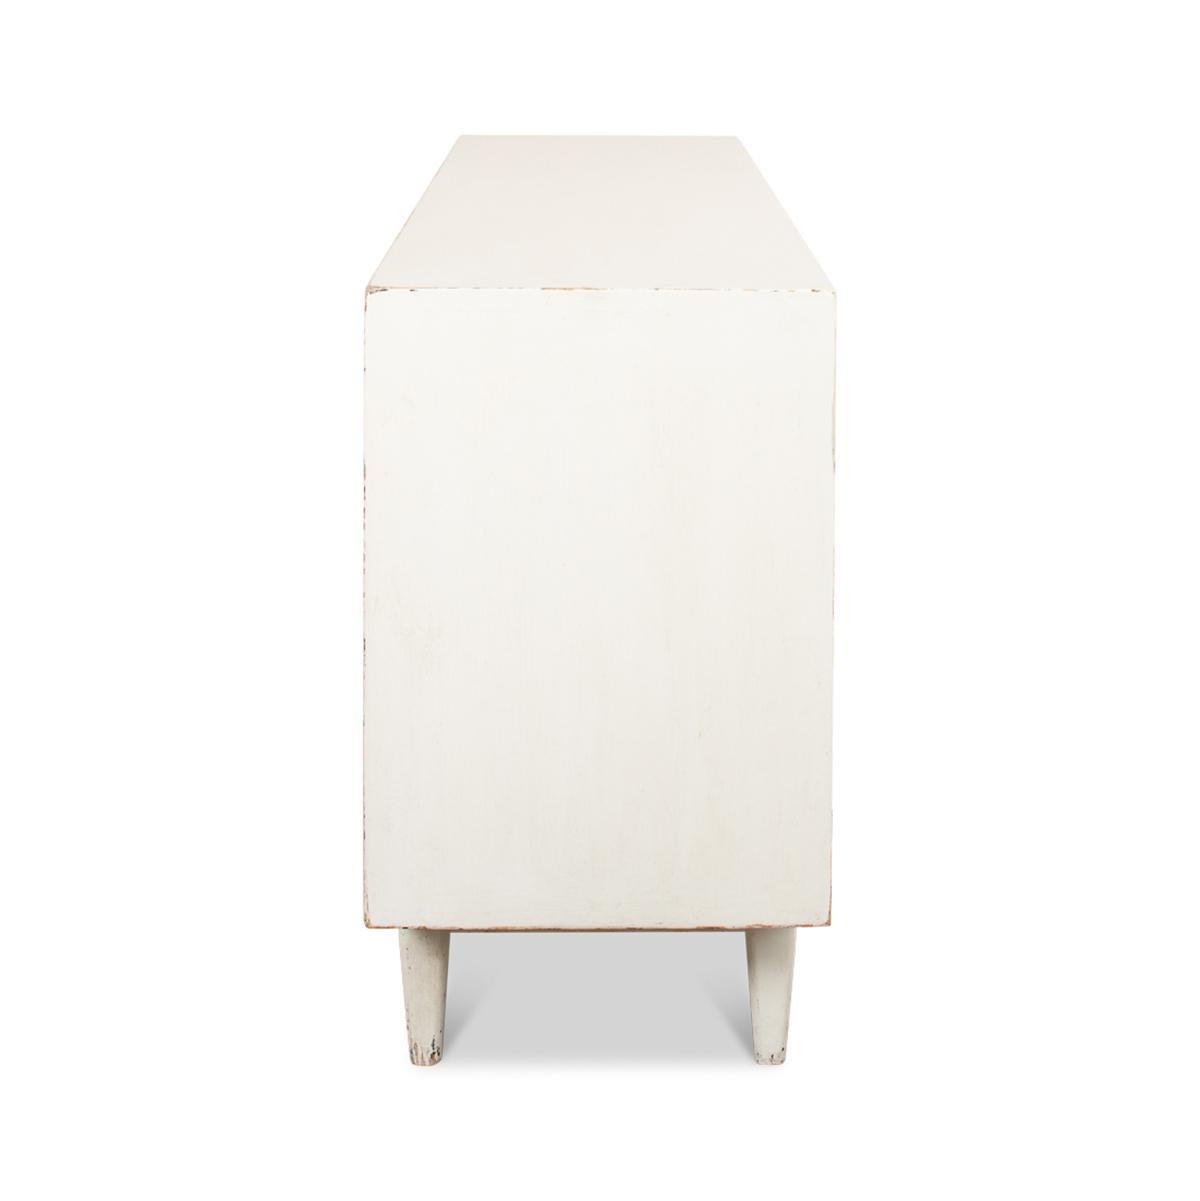 Contemporary Antiqued White Painted Sideboard For Sale